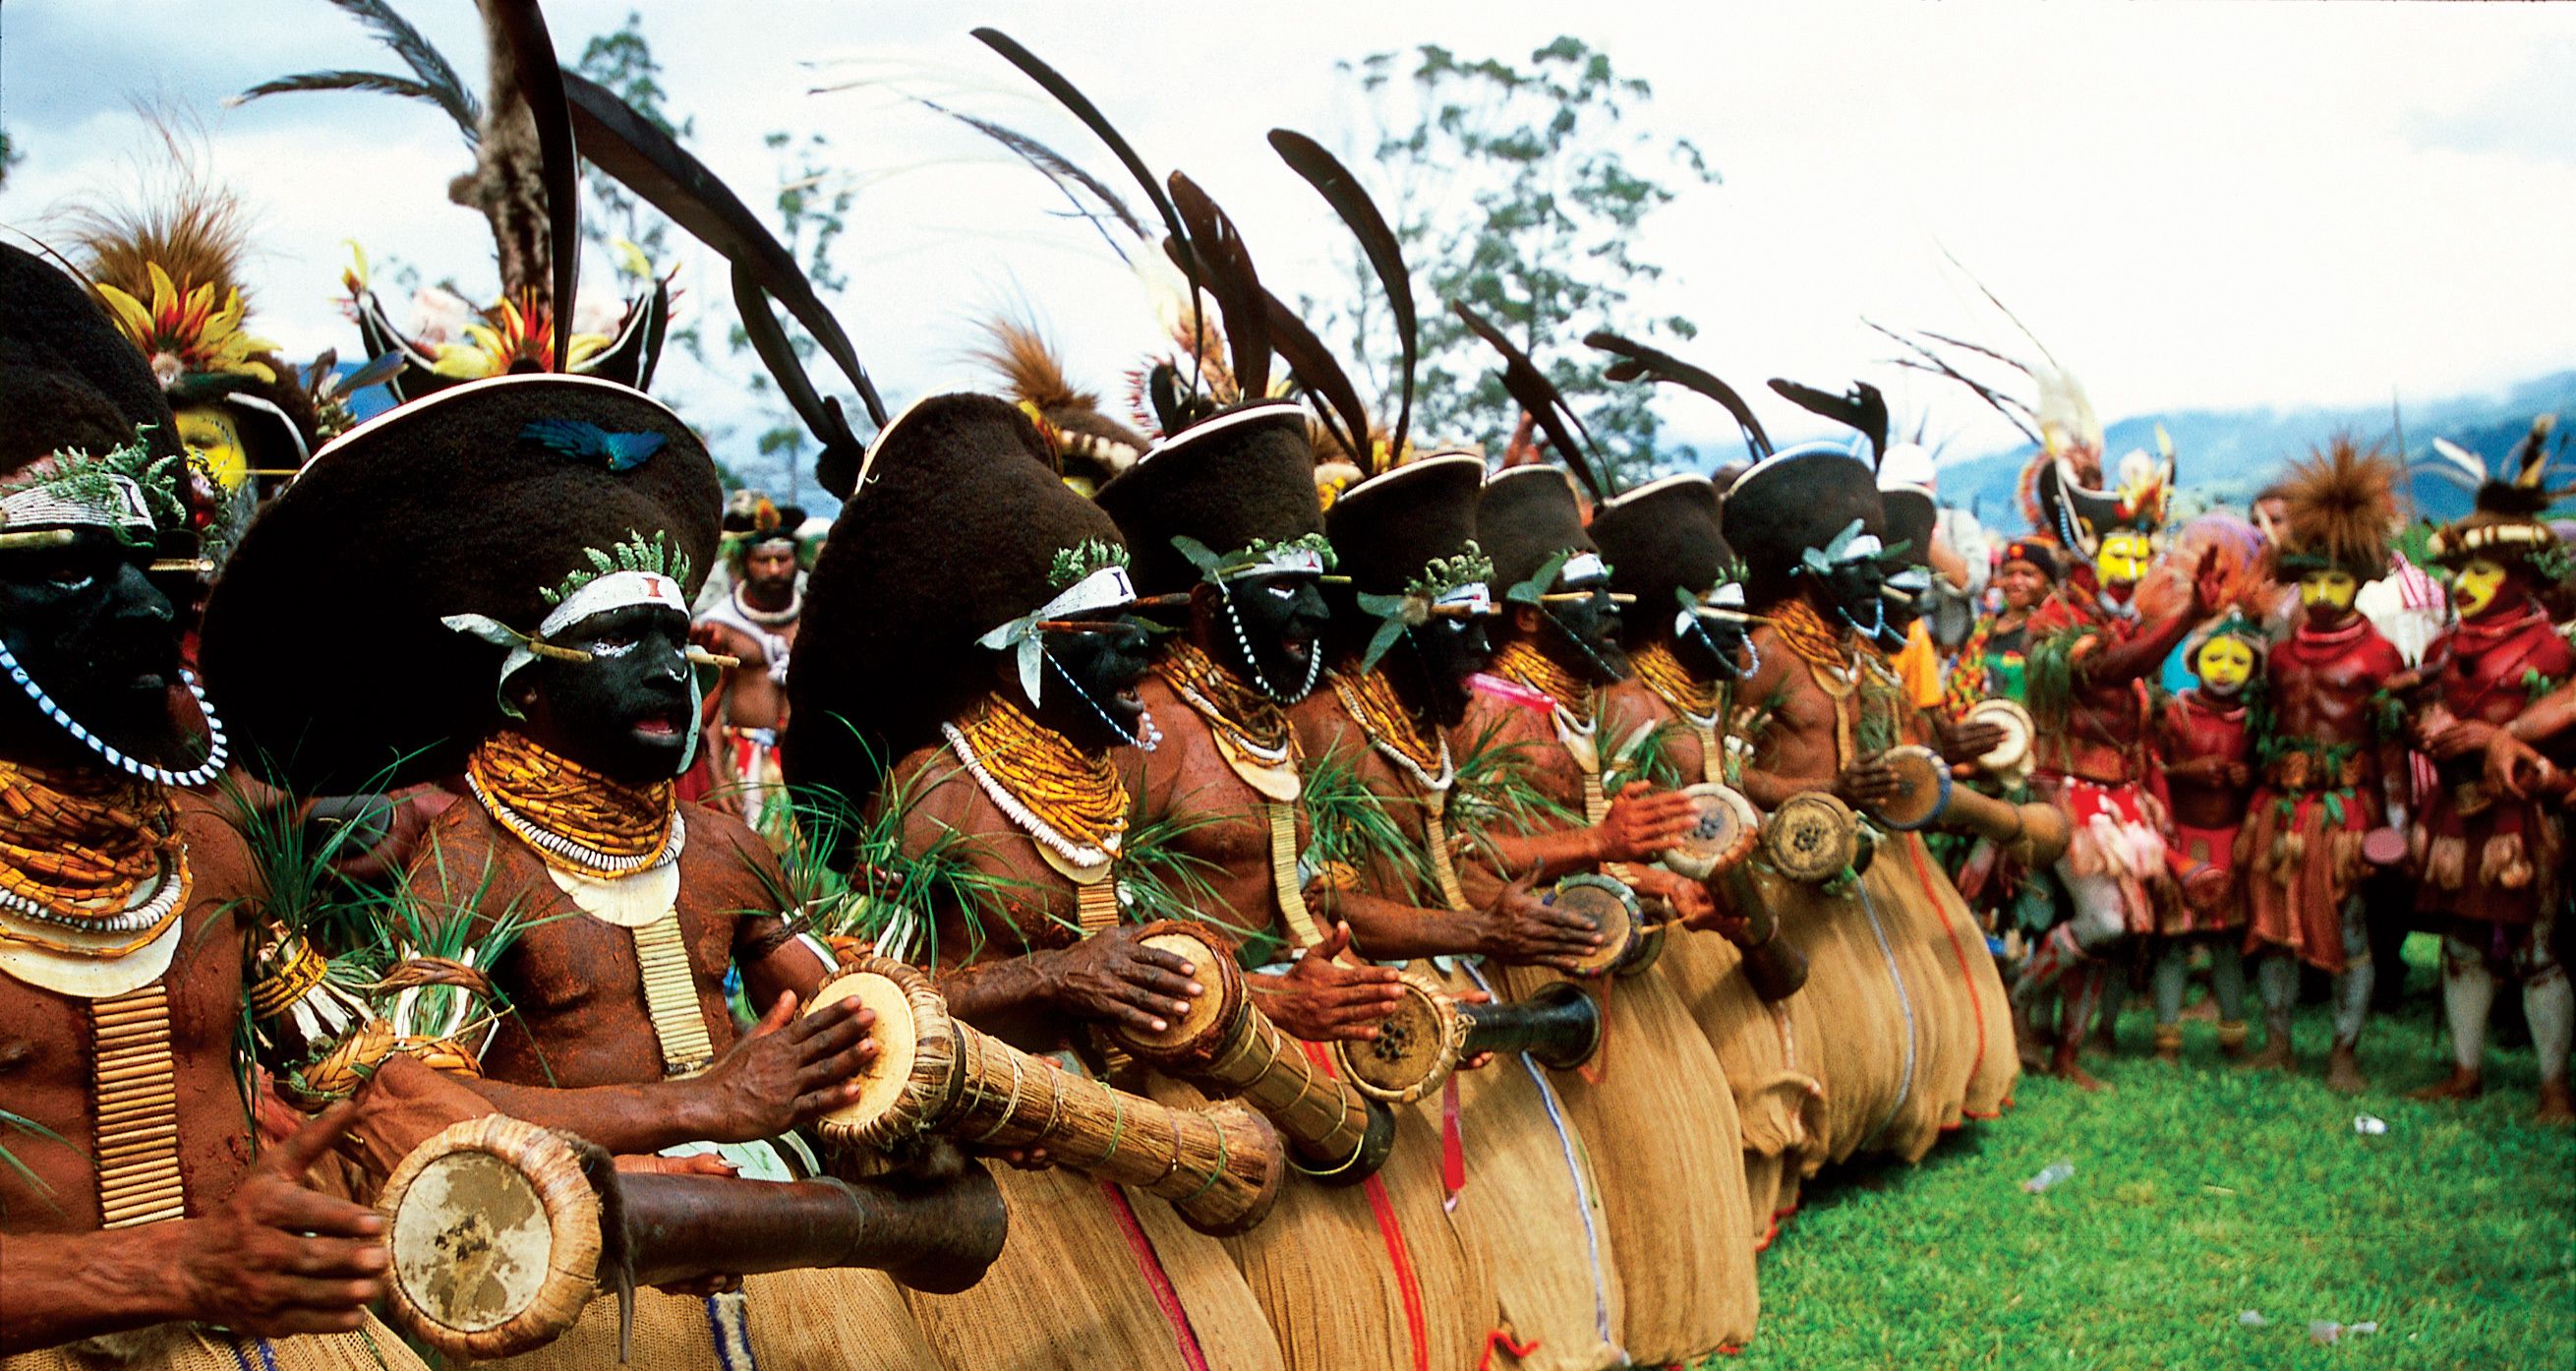 Papua New Guinea Wallpaper Image Photo Picture Background